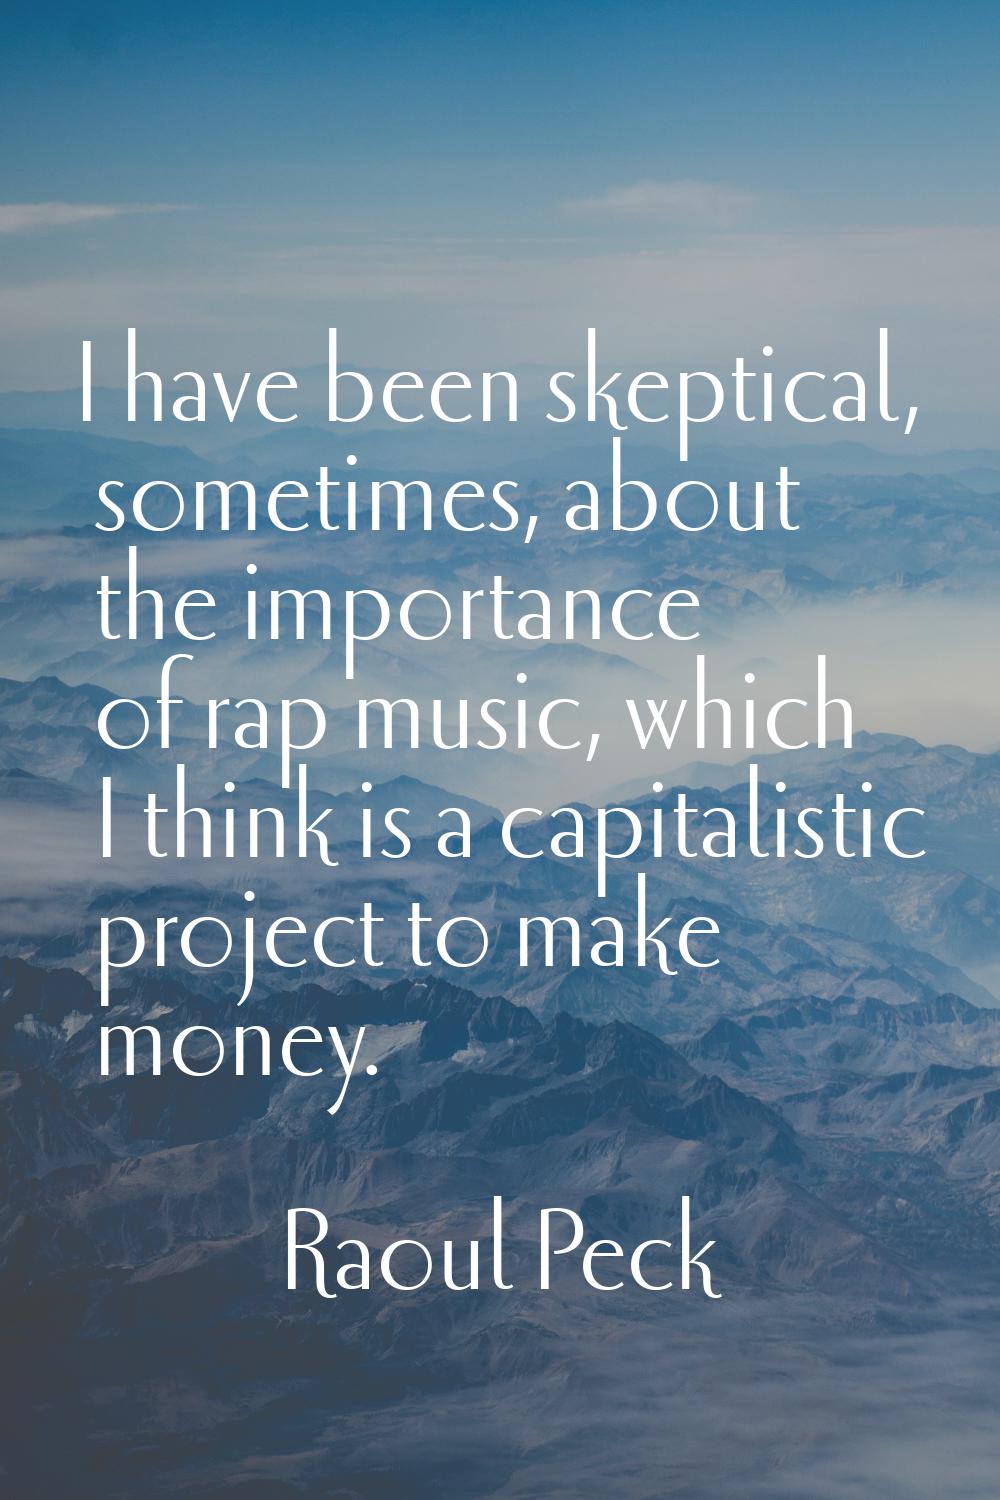 I have been skeptical, sometimes, about the importance of rap music, which I think is a capitalisti